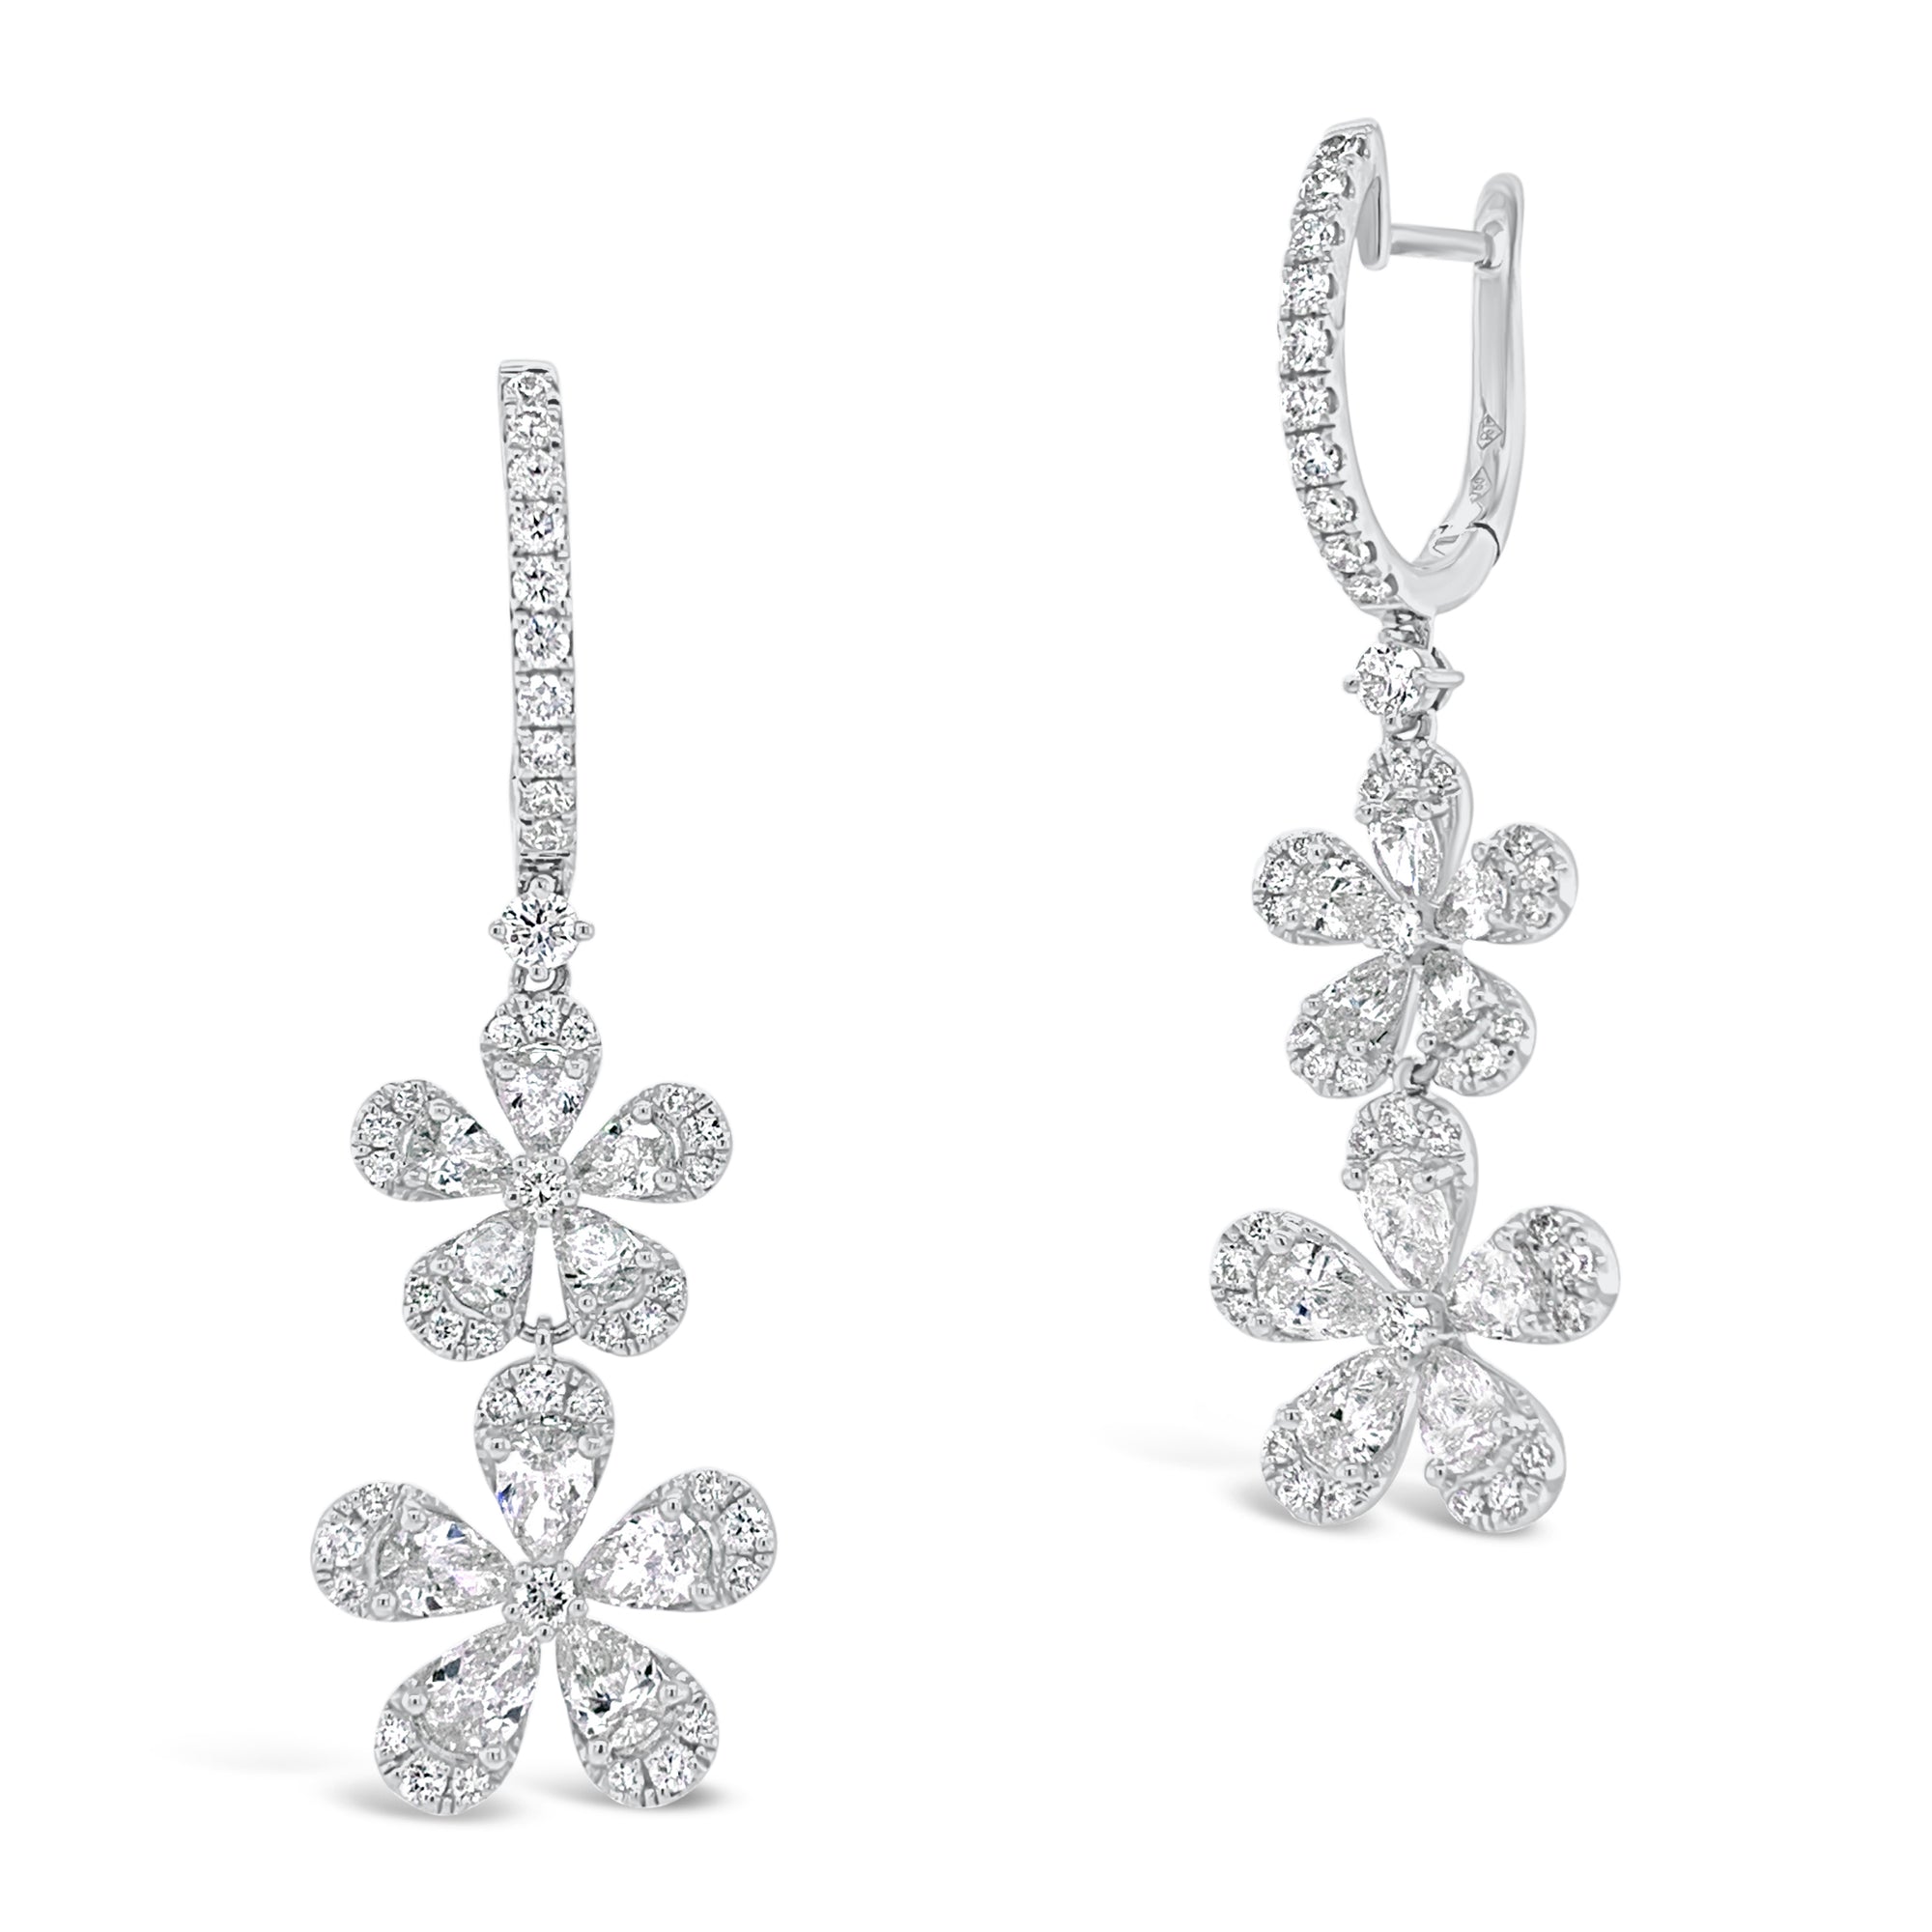 Diamond Double Flower Drop Earrings  -18K gold weighing 7.02 grams  -86 round diamonds totaling 0.87 carats  -20 Pear shape prong-set diamonds totaling 2.33 carats 